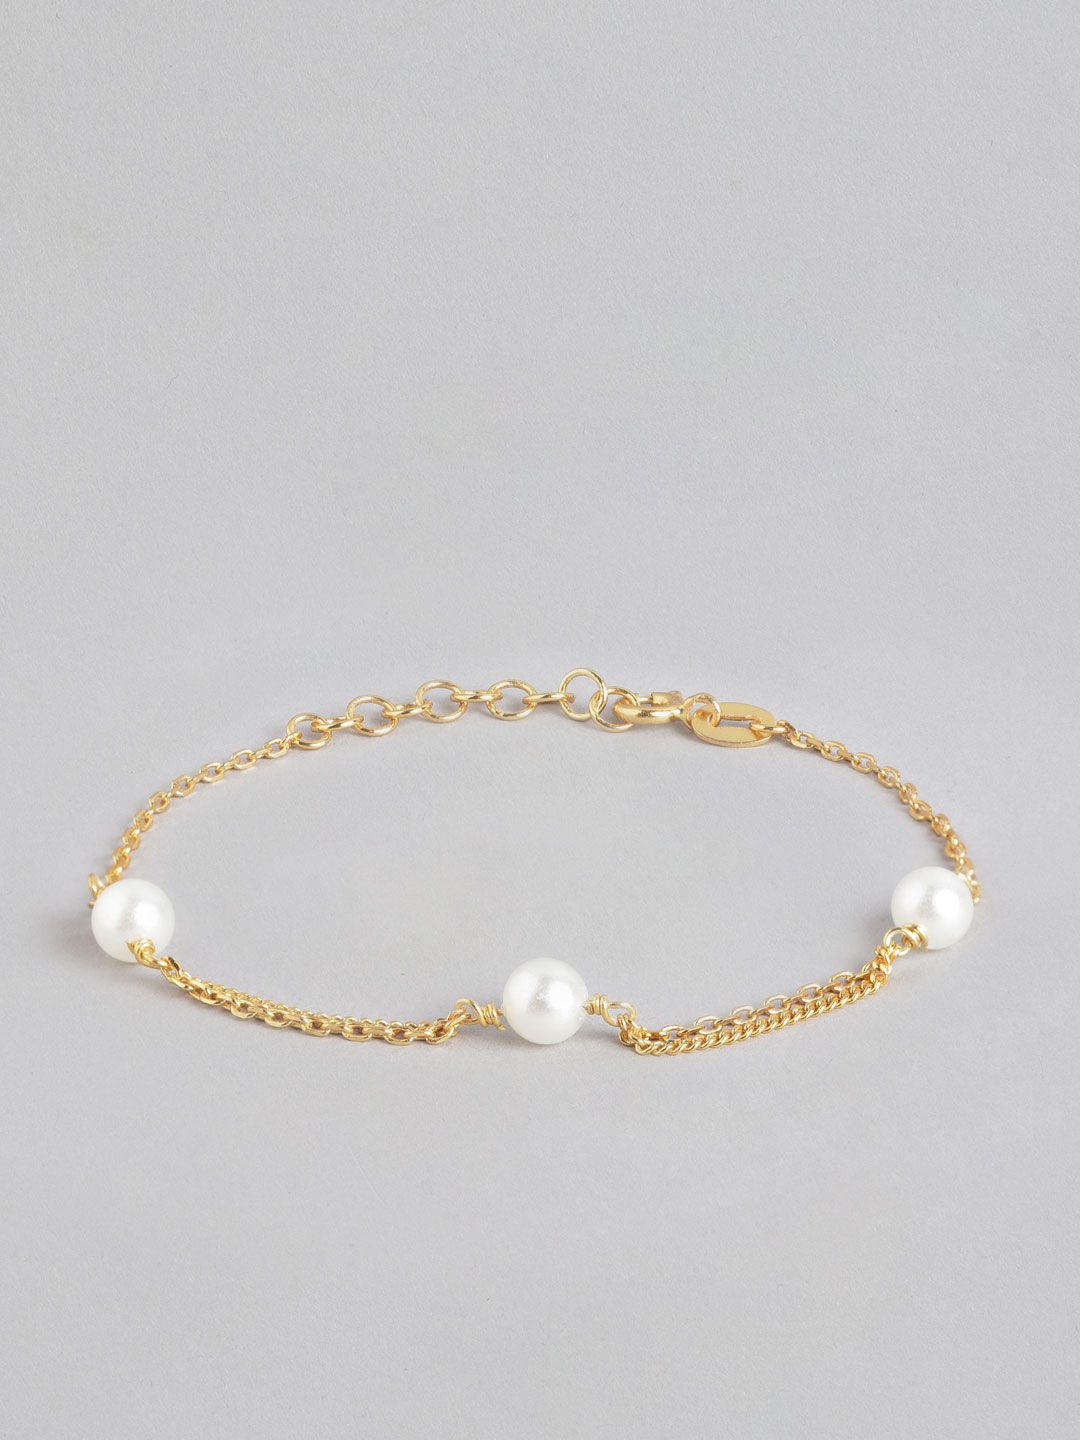 Carlton London Gold-Plated White Pearl Studded Handcrafted Link Bracelet Price in India